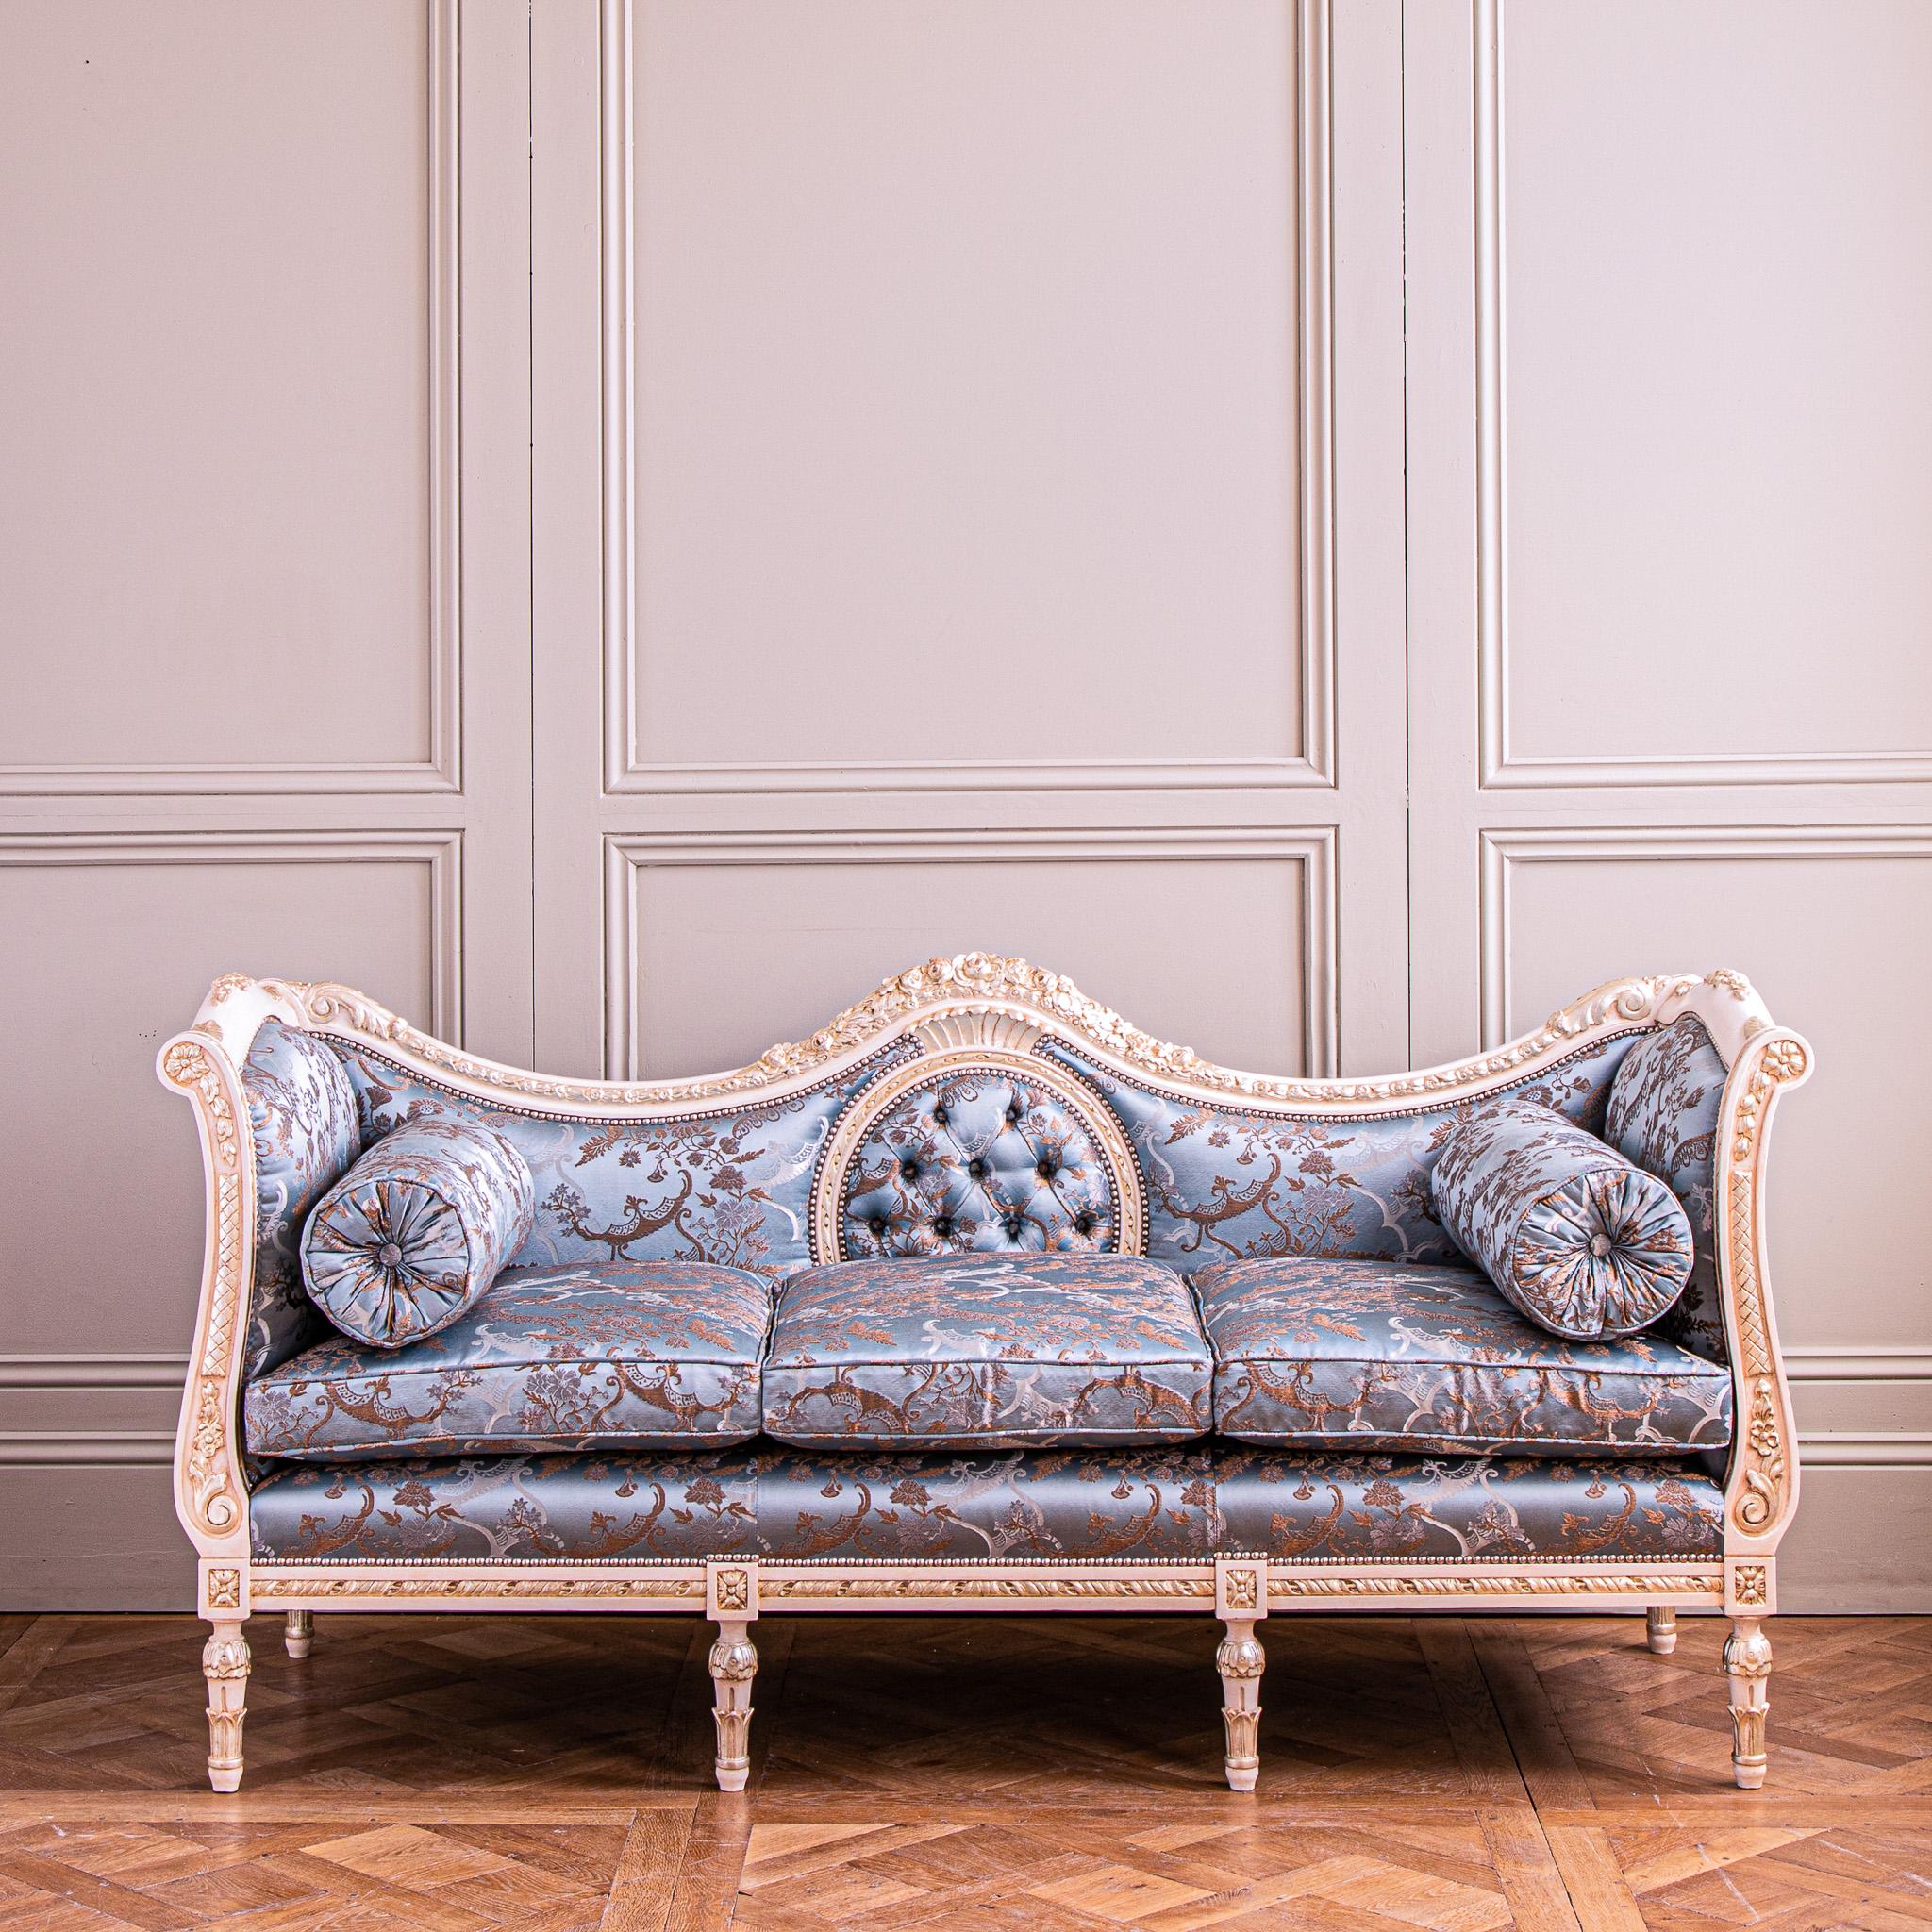 This exceptional, Louis XVI style sofa/settee is hand carved in solid lime wood and can be customized to your requirements.
This French design features finely carved details, including: floral & ribbon work with stylised acanthus leaf adorned legs.